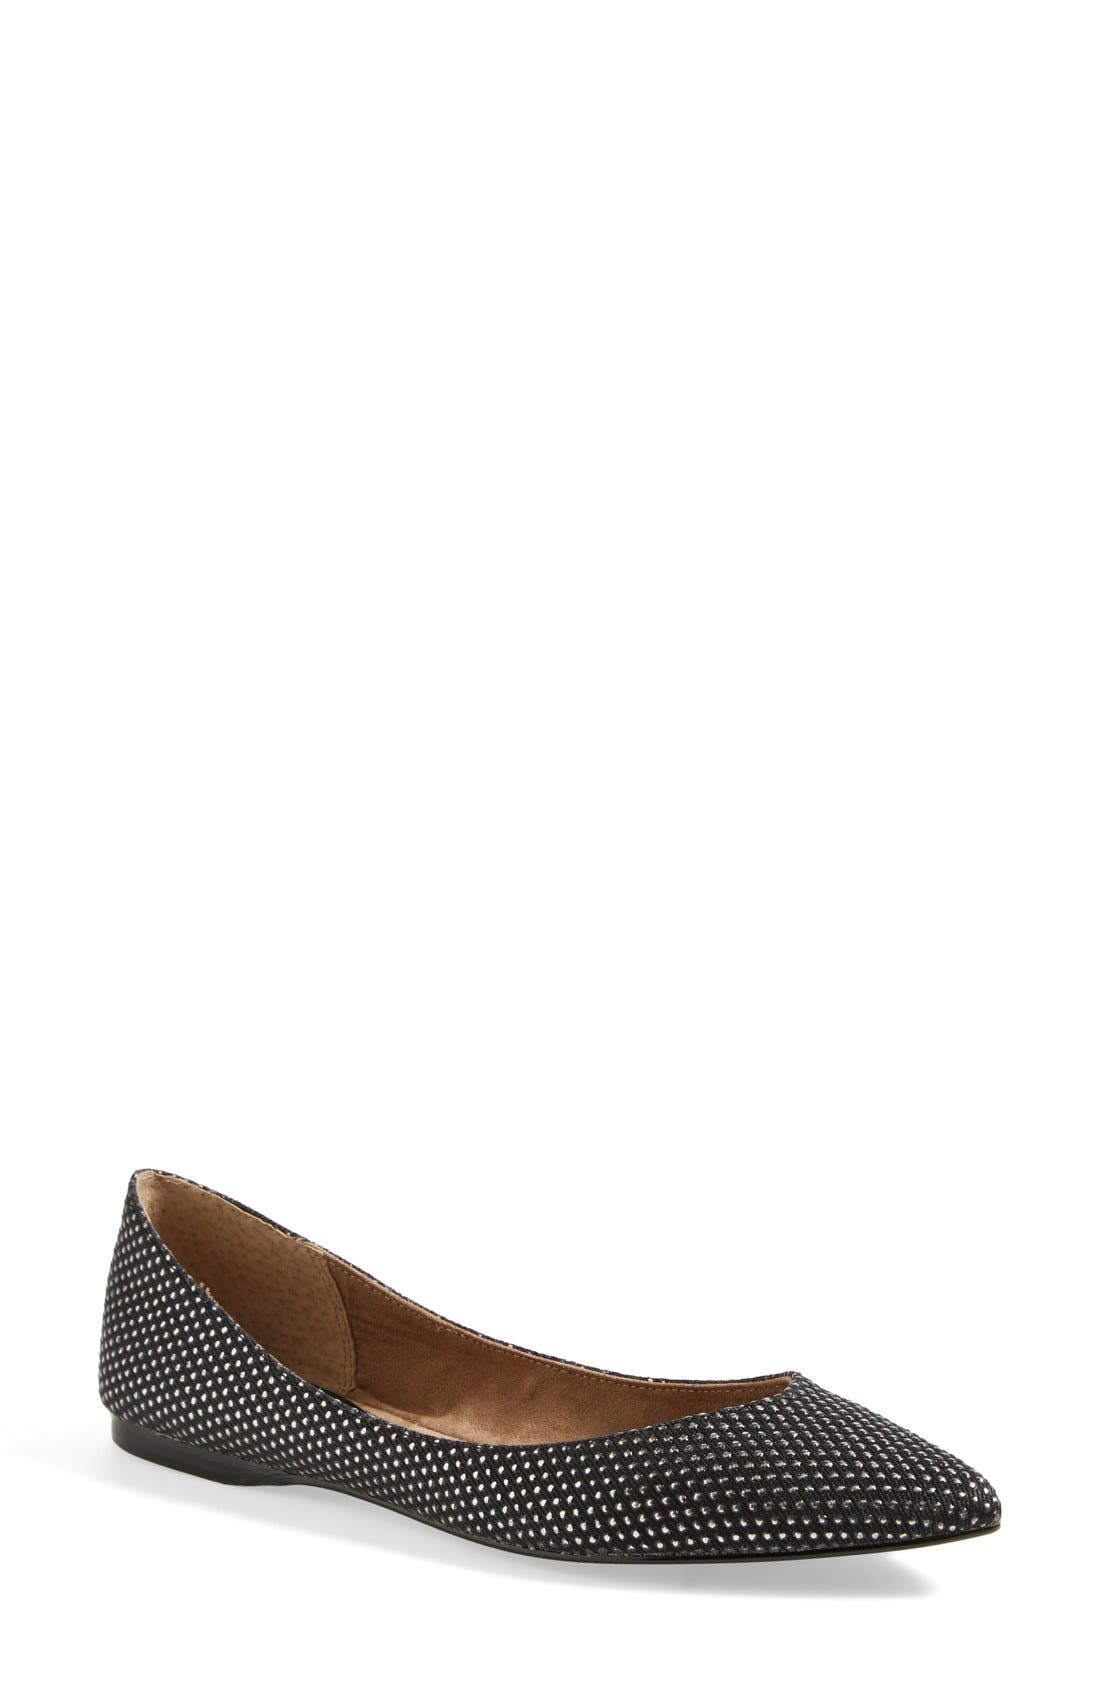 nordstrom pointed toe flats